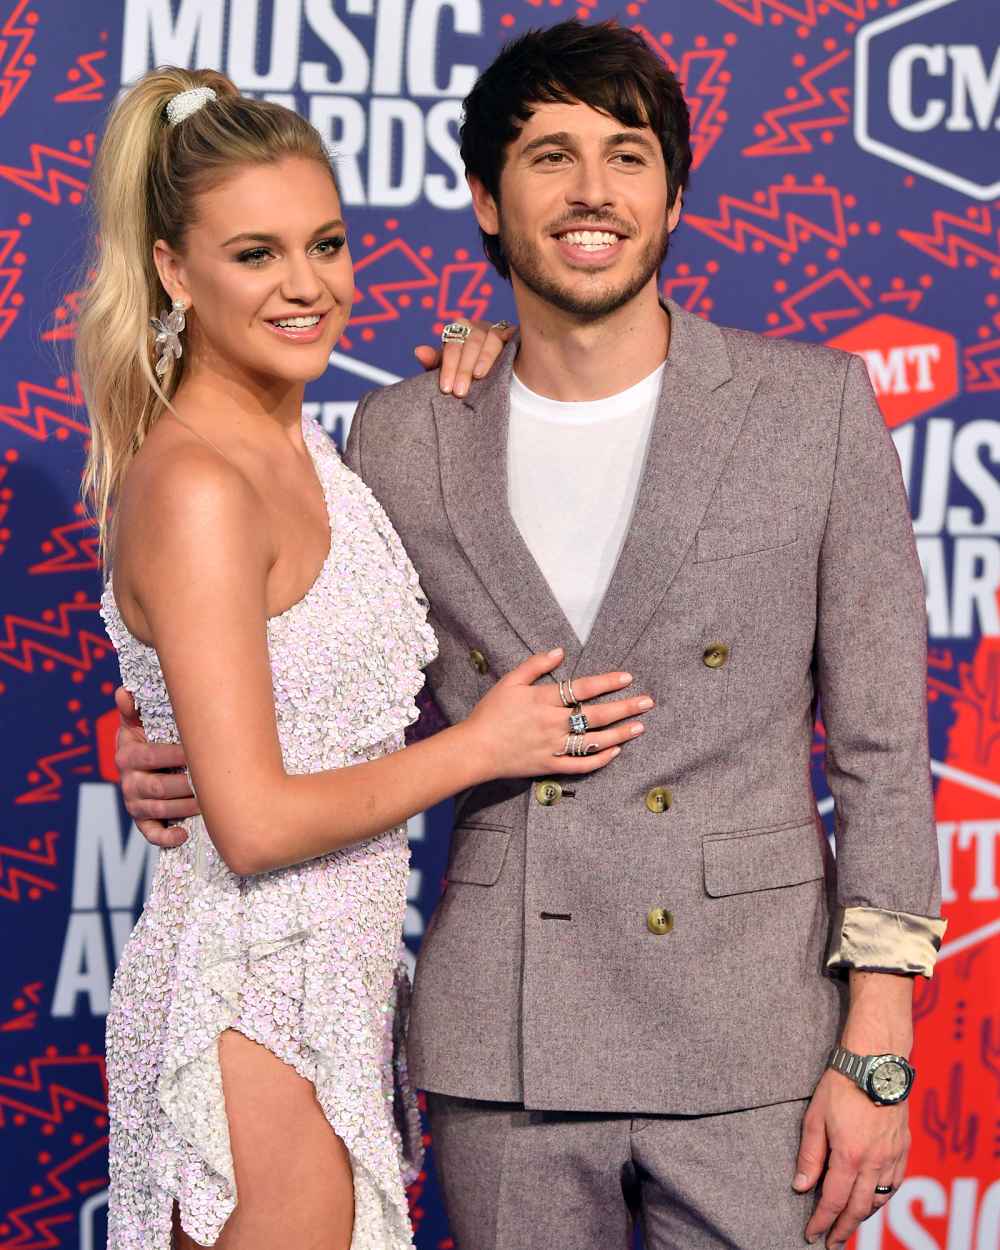 Kelsea Ballerini Hints at New Chapter Amid Morgan Evans Divorce: 'Right Where I'm at With What I Have'